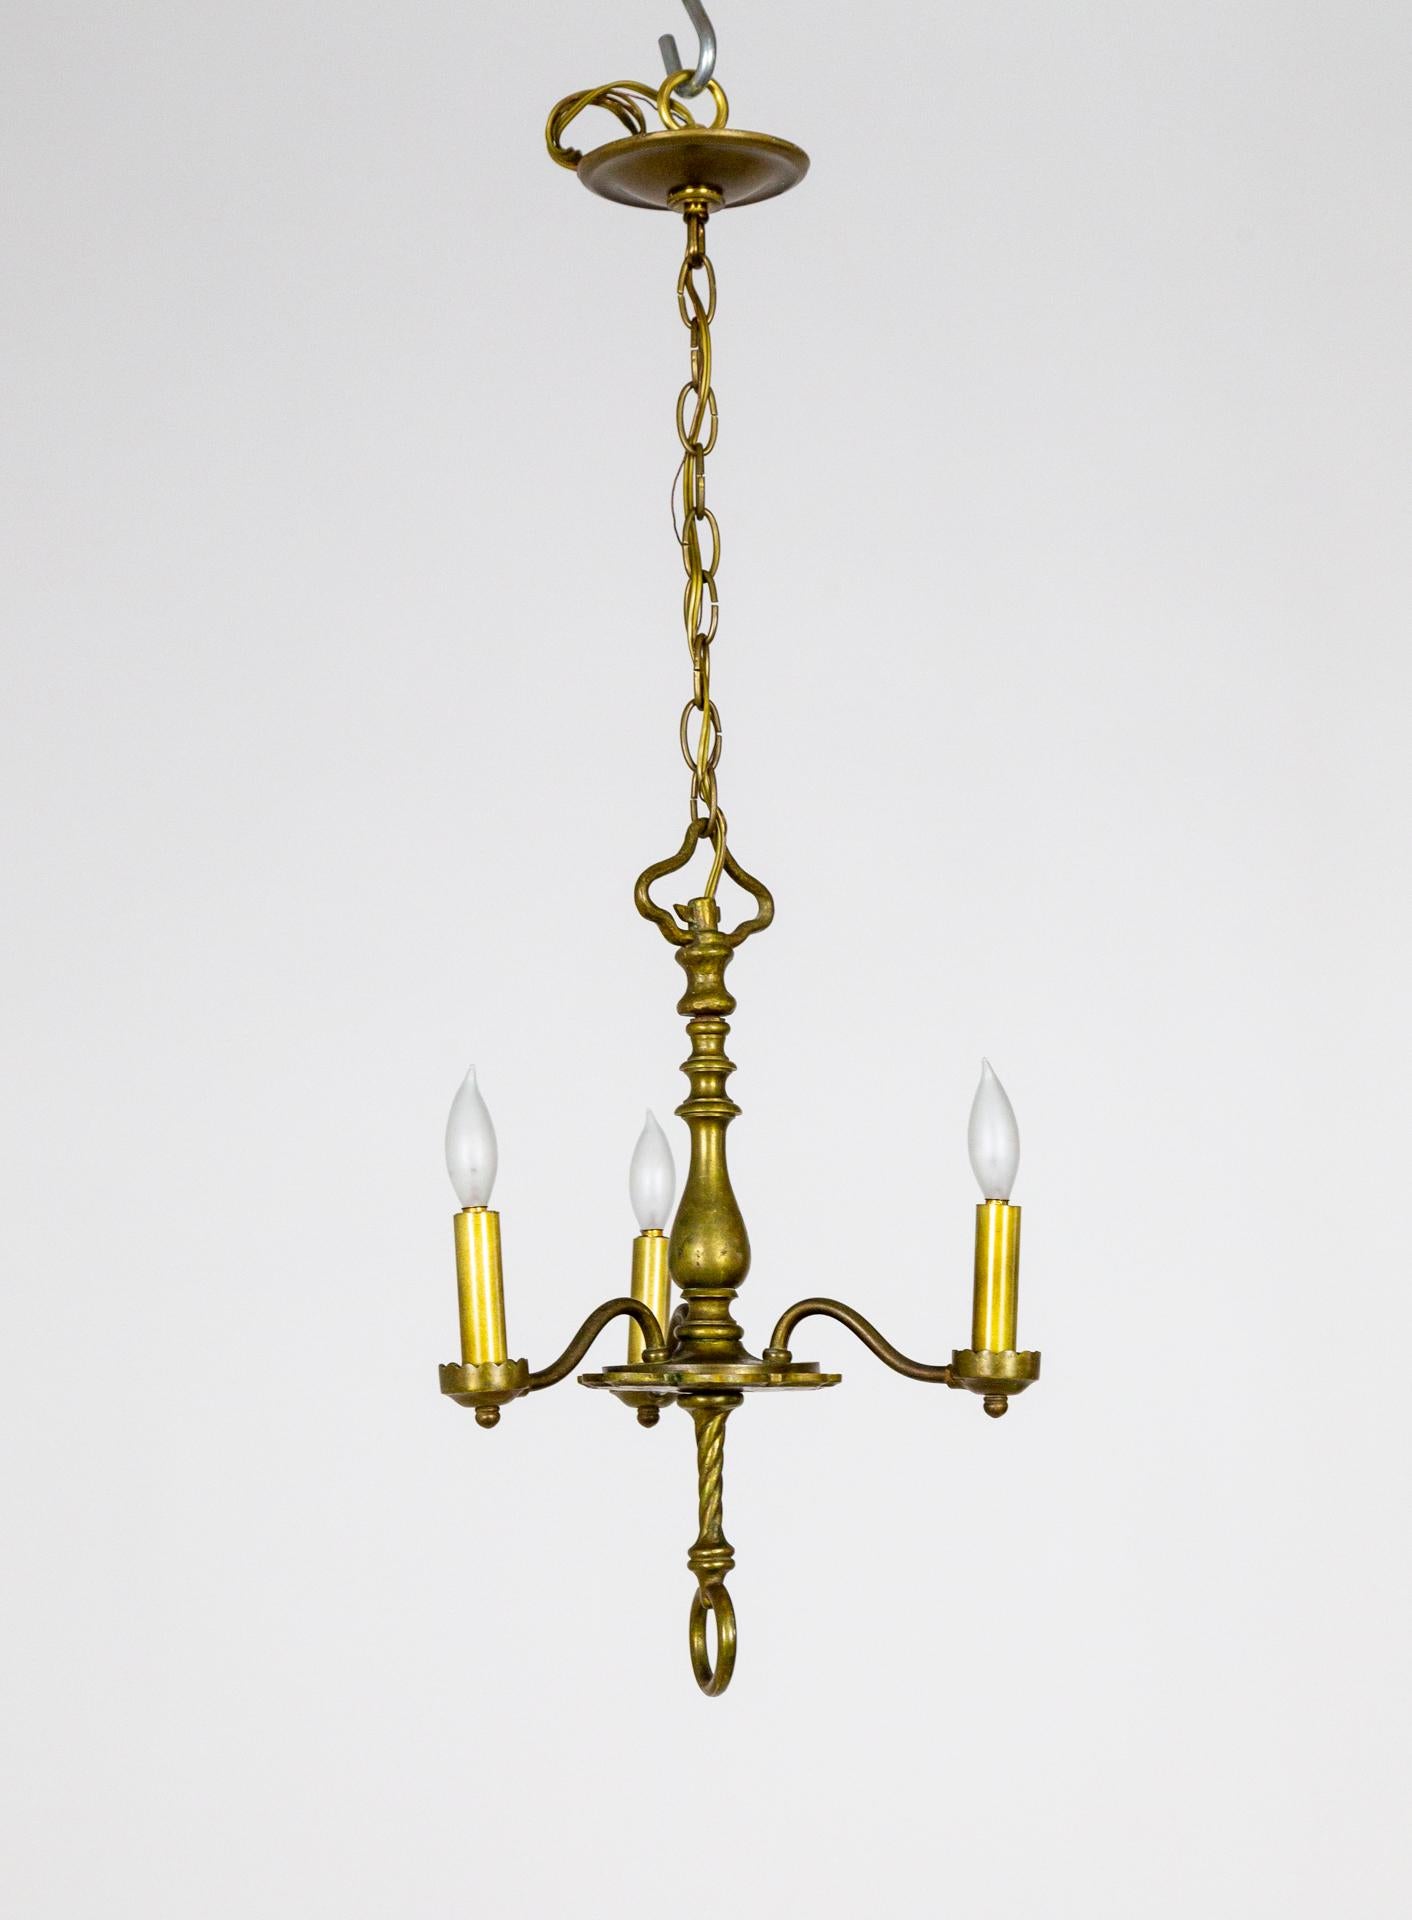 A refined, well proportioned, 3-light, brass chandelier with sophisticated accents and hand made details - the scalloped body plate, a chain hook that mimics the arm curvature, rope stem, turned body, loop finial and brass candle covers. Late 19th